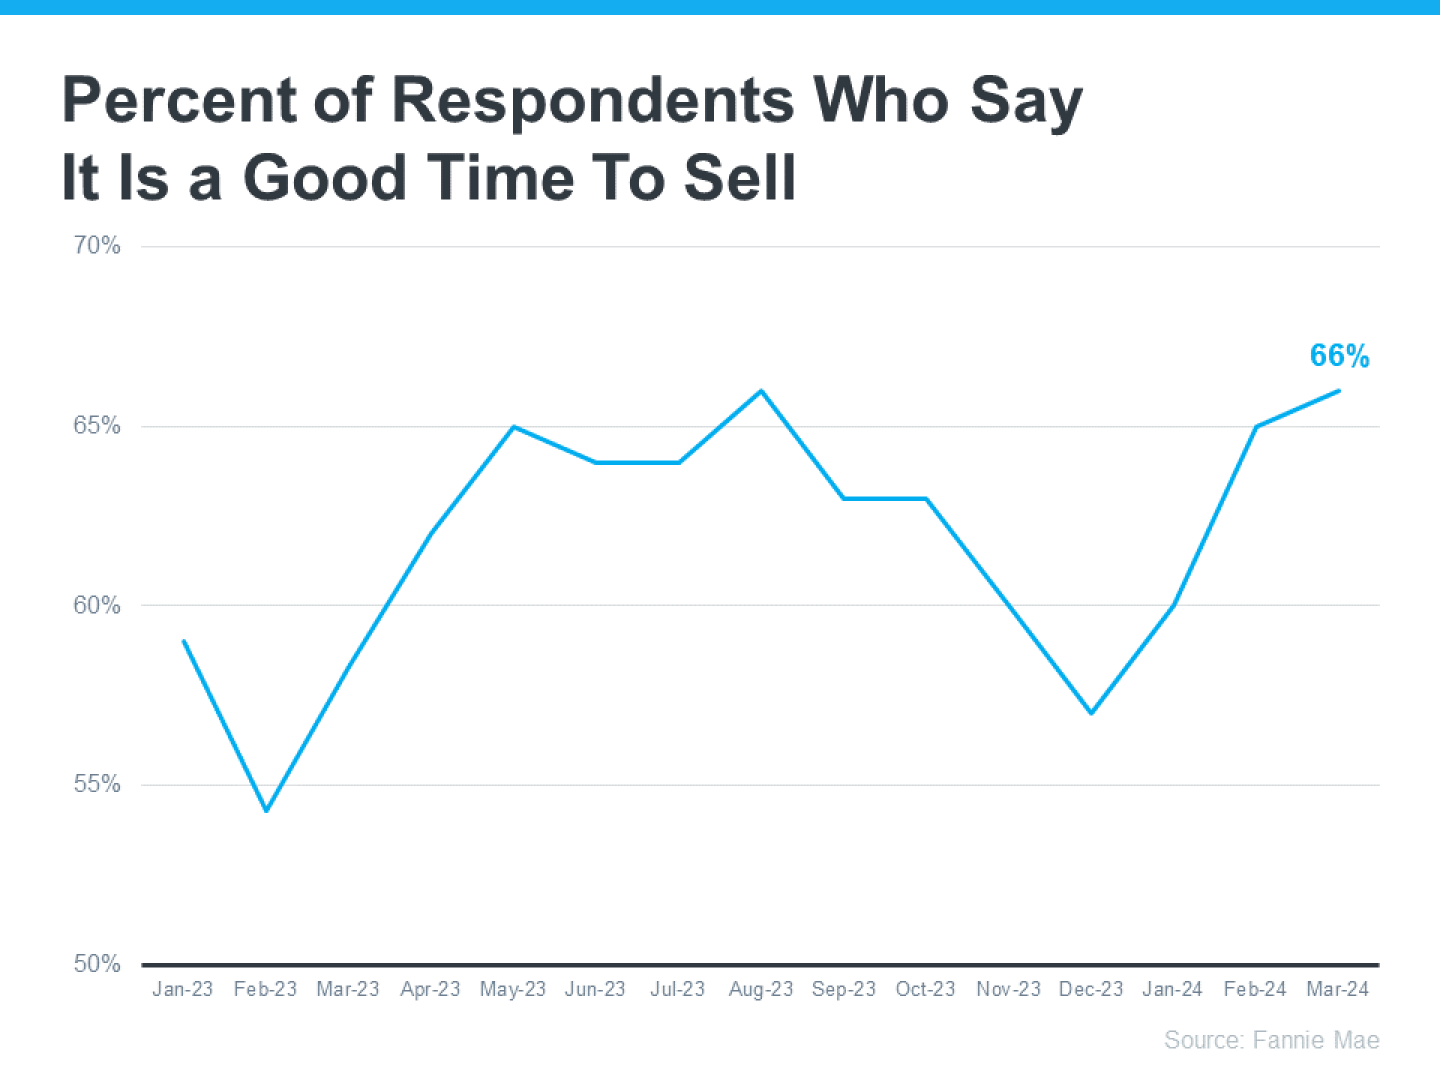 20240429-Percent-of-Respondents-Who-Say-It-Is-a-Good-Time-To-Sell.png